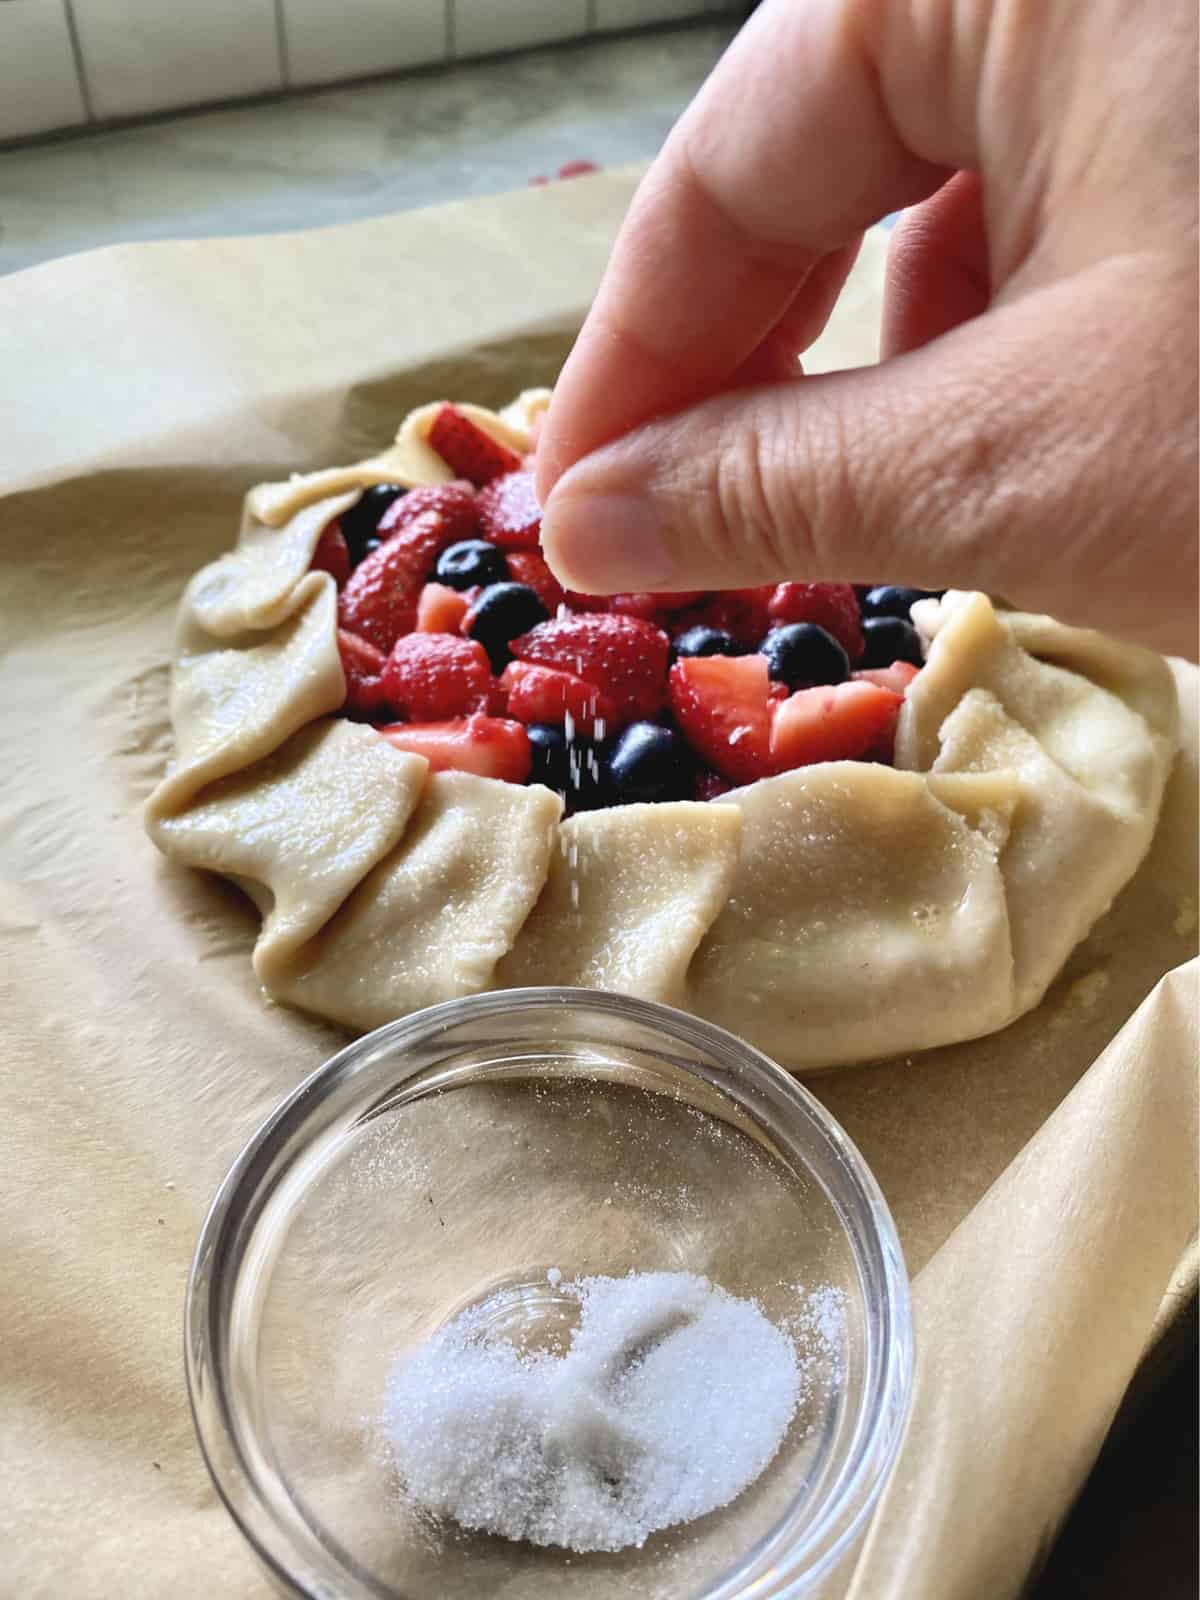 Hand sprinkling granulated sugar on an egg washed pie crust with berries in the center.